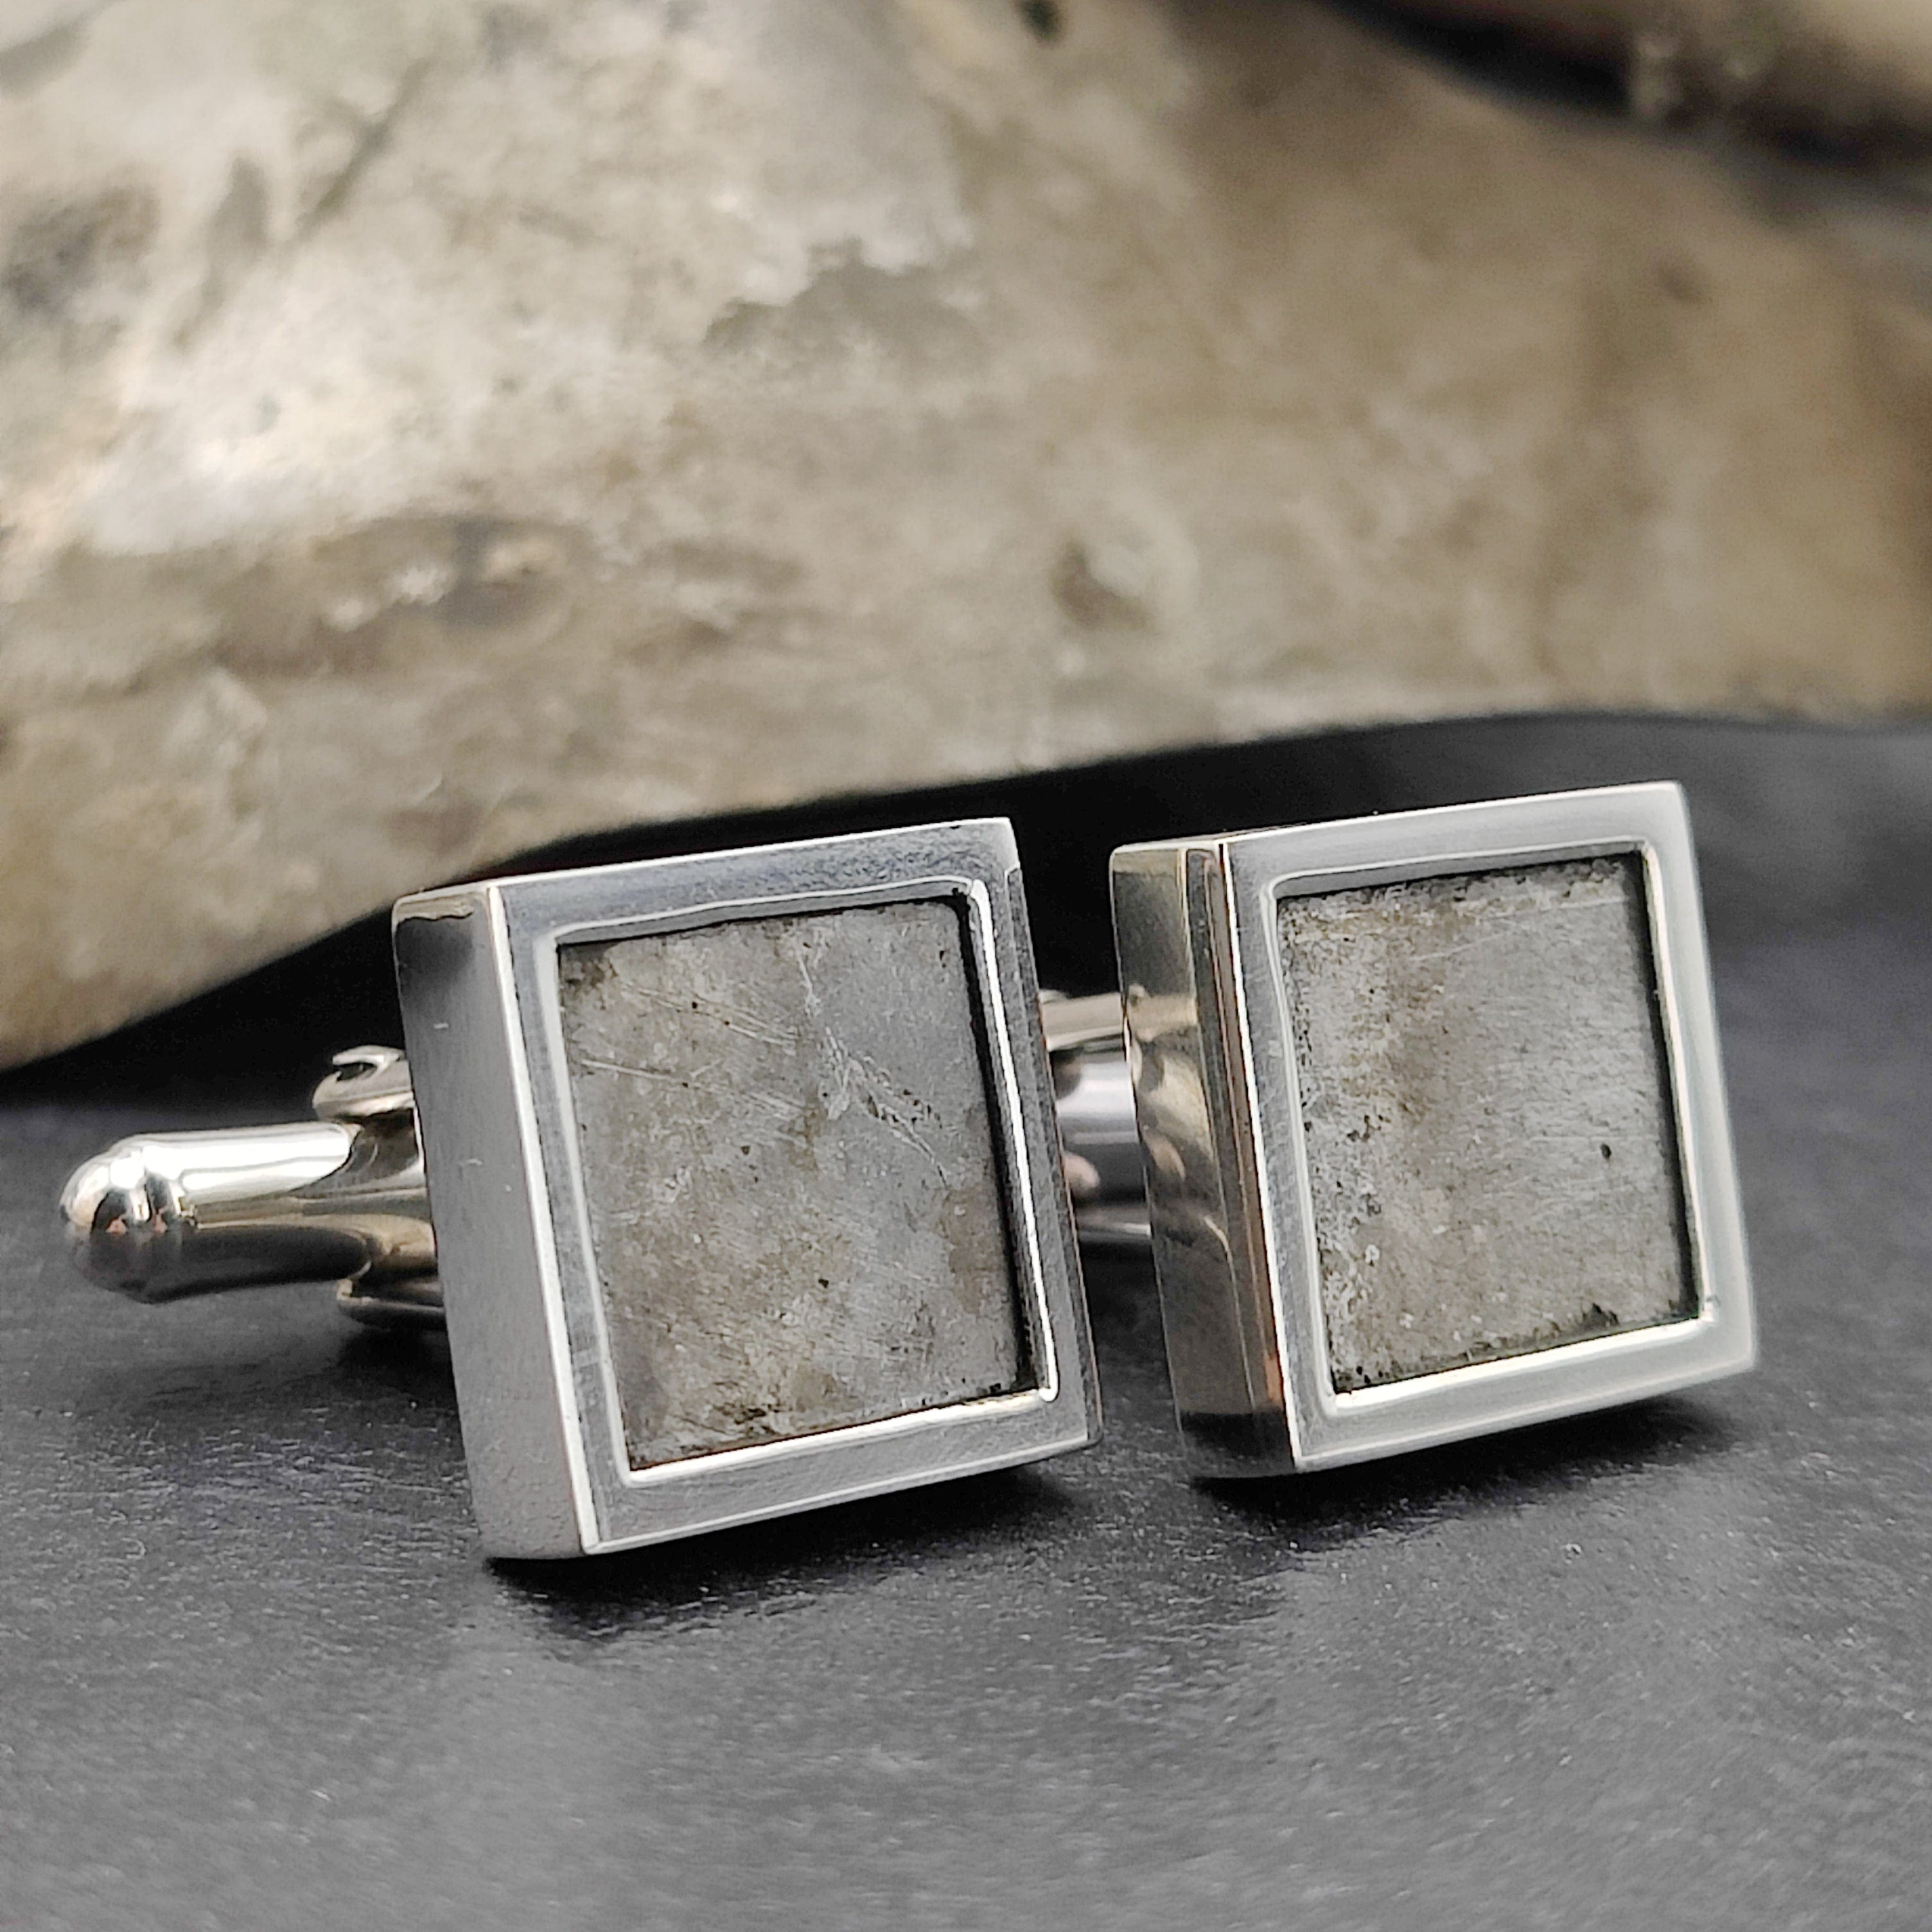 Hepburn and Hughes WW2 Hurricane Cufflinks | Made from original parts | Sterling Silver